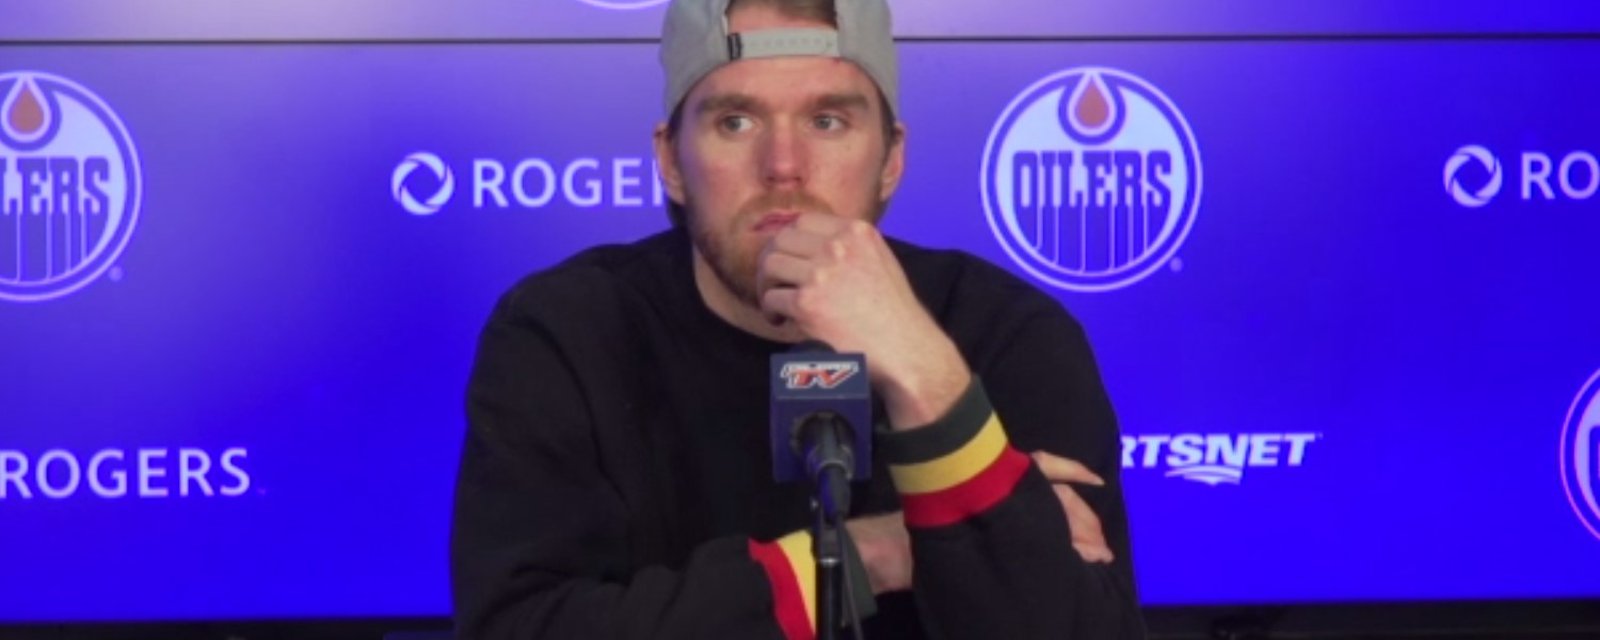 McDavid delivers clear message to management and fans amidst trade demand rumours 